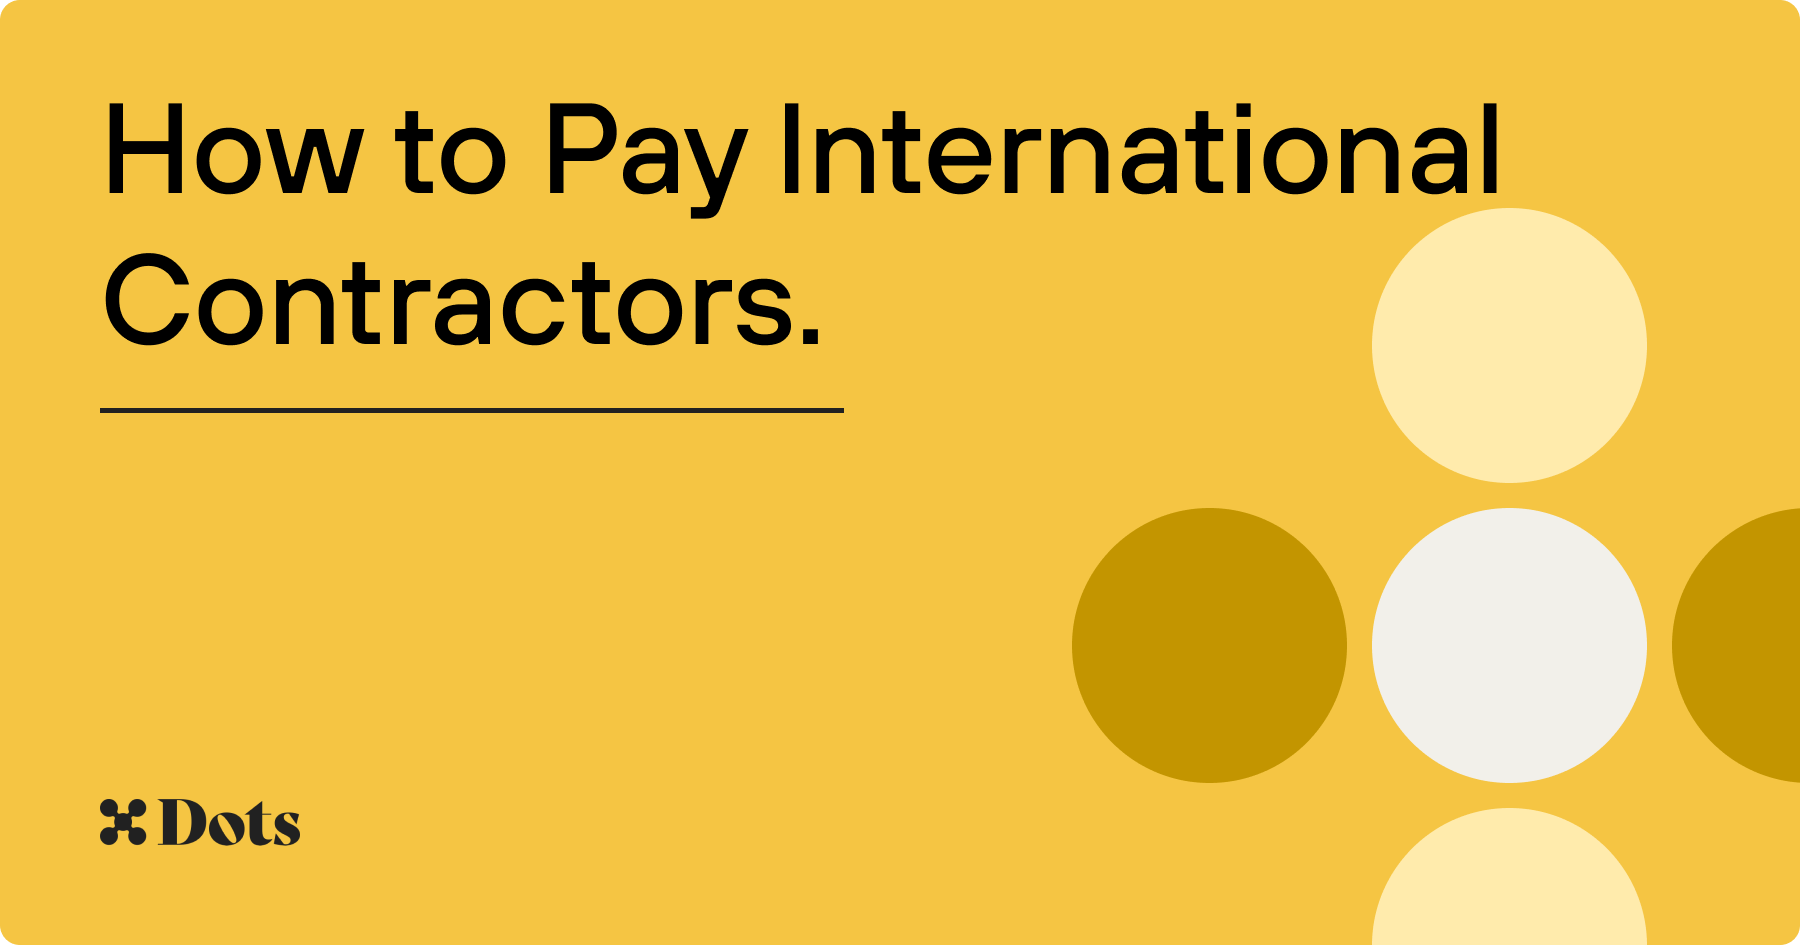 How to Pay International Contractors